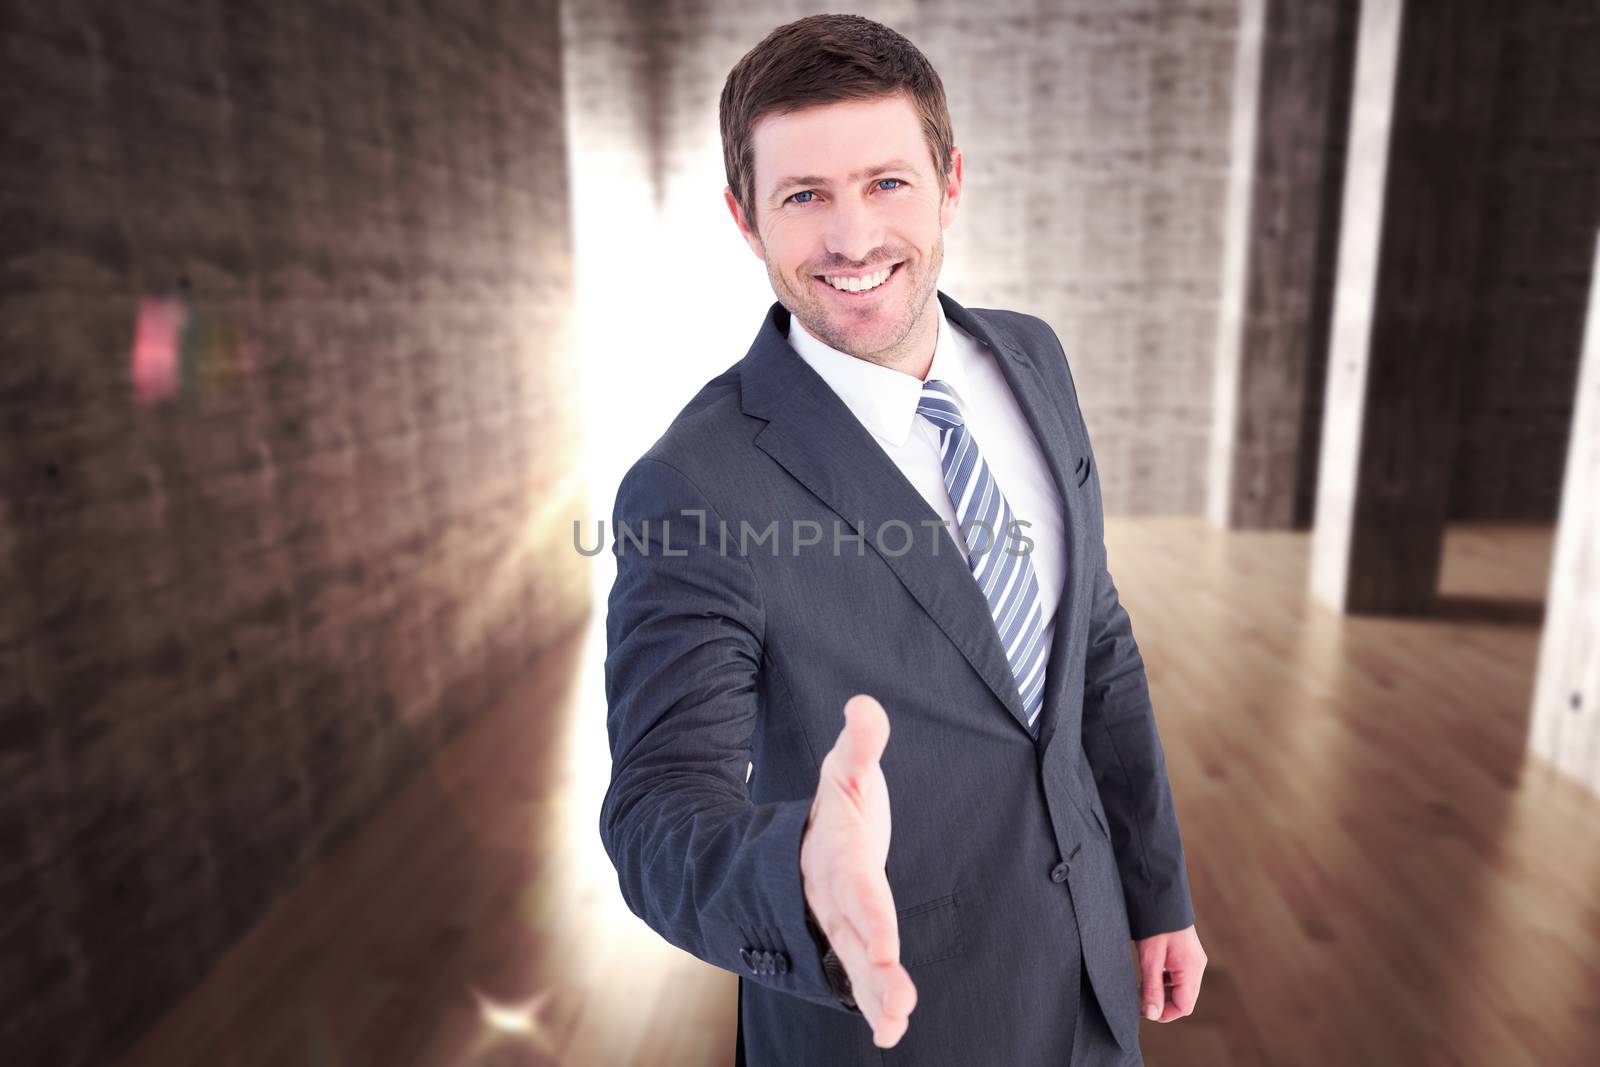 Businessman smiling and offering his hand against abstract room